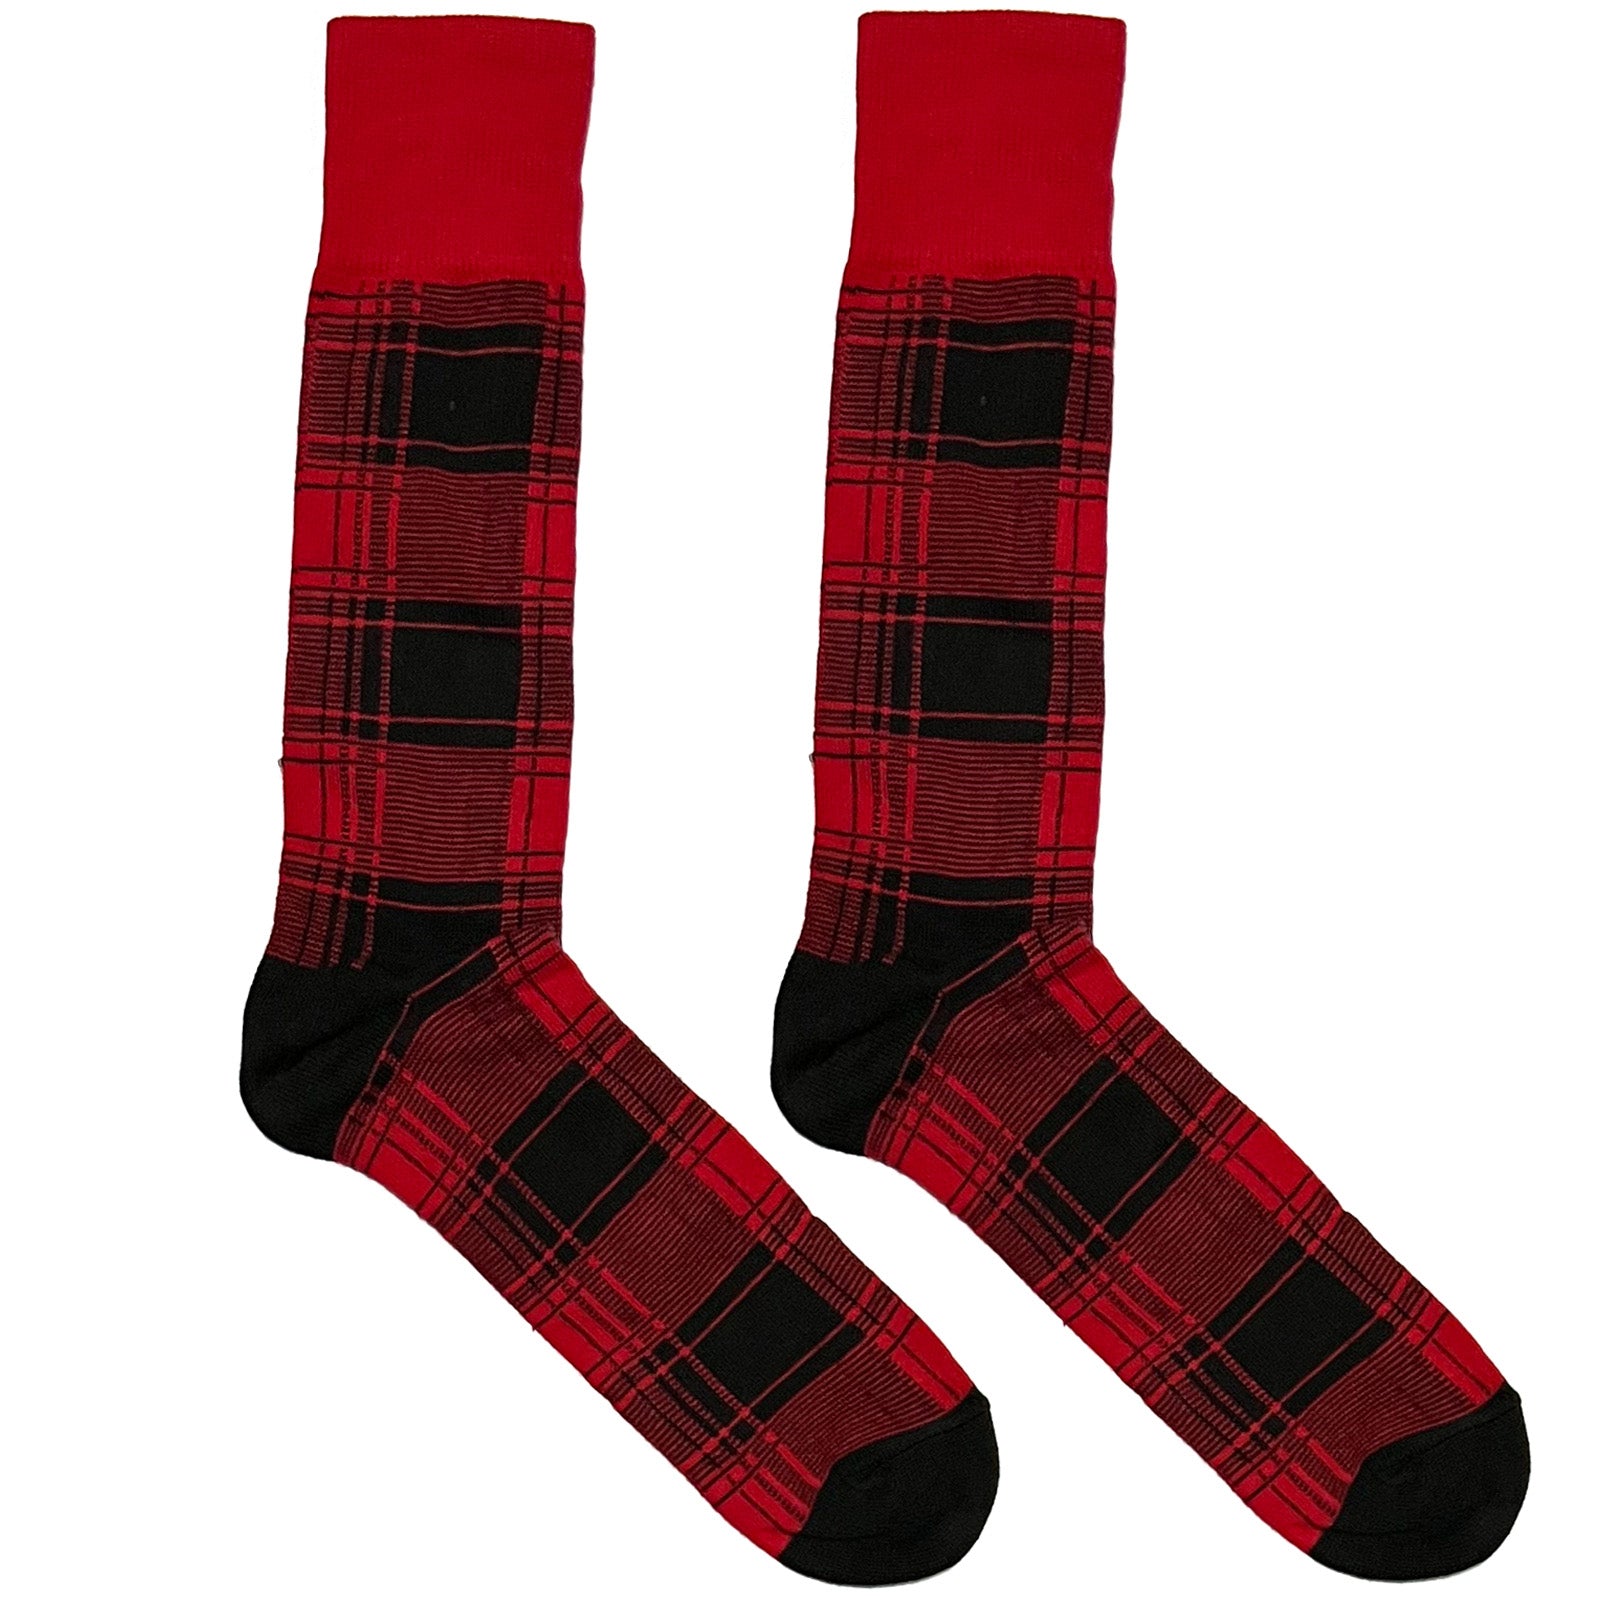 Red And Black Chequered Socks